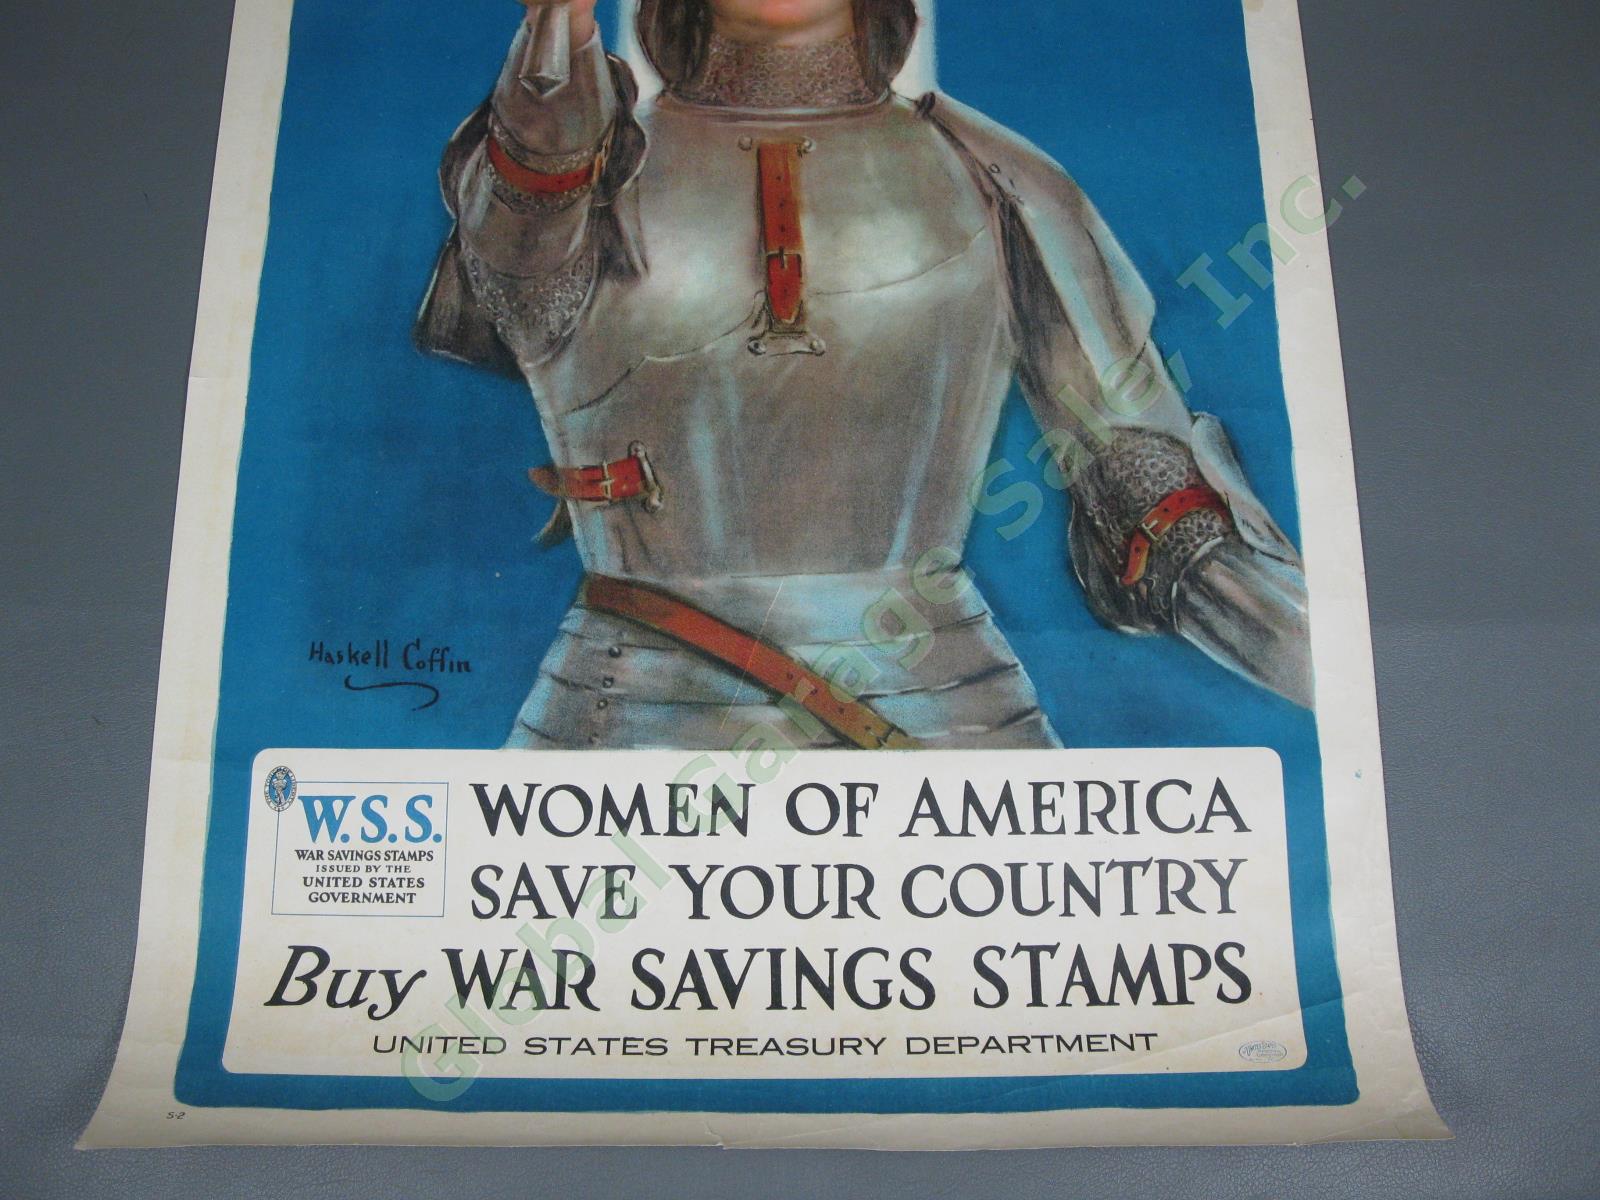 Original WWI Joan of Arc Saved France Women America Haskell Coffin Litho Poster 2